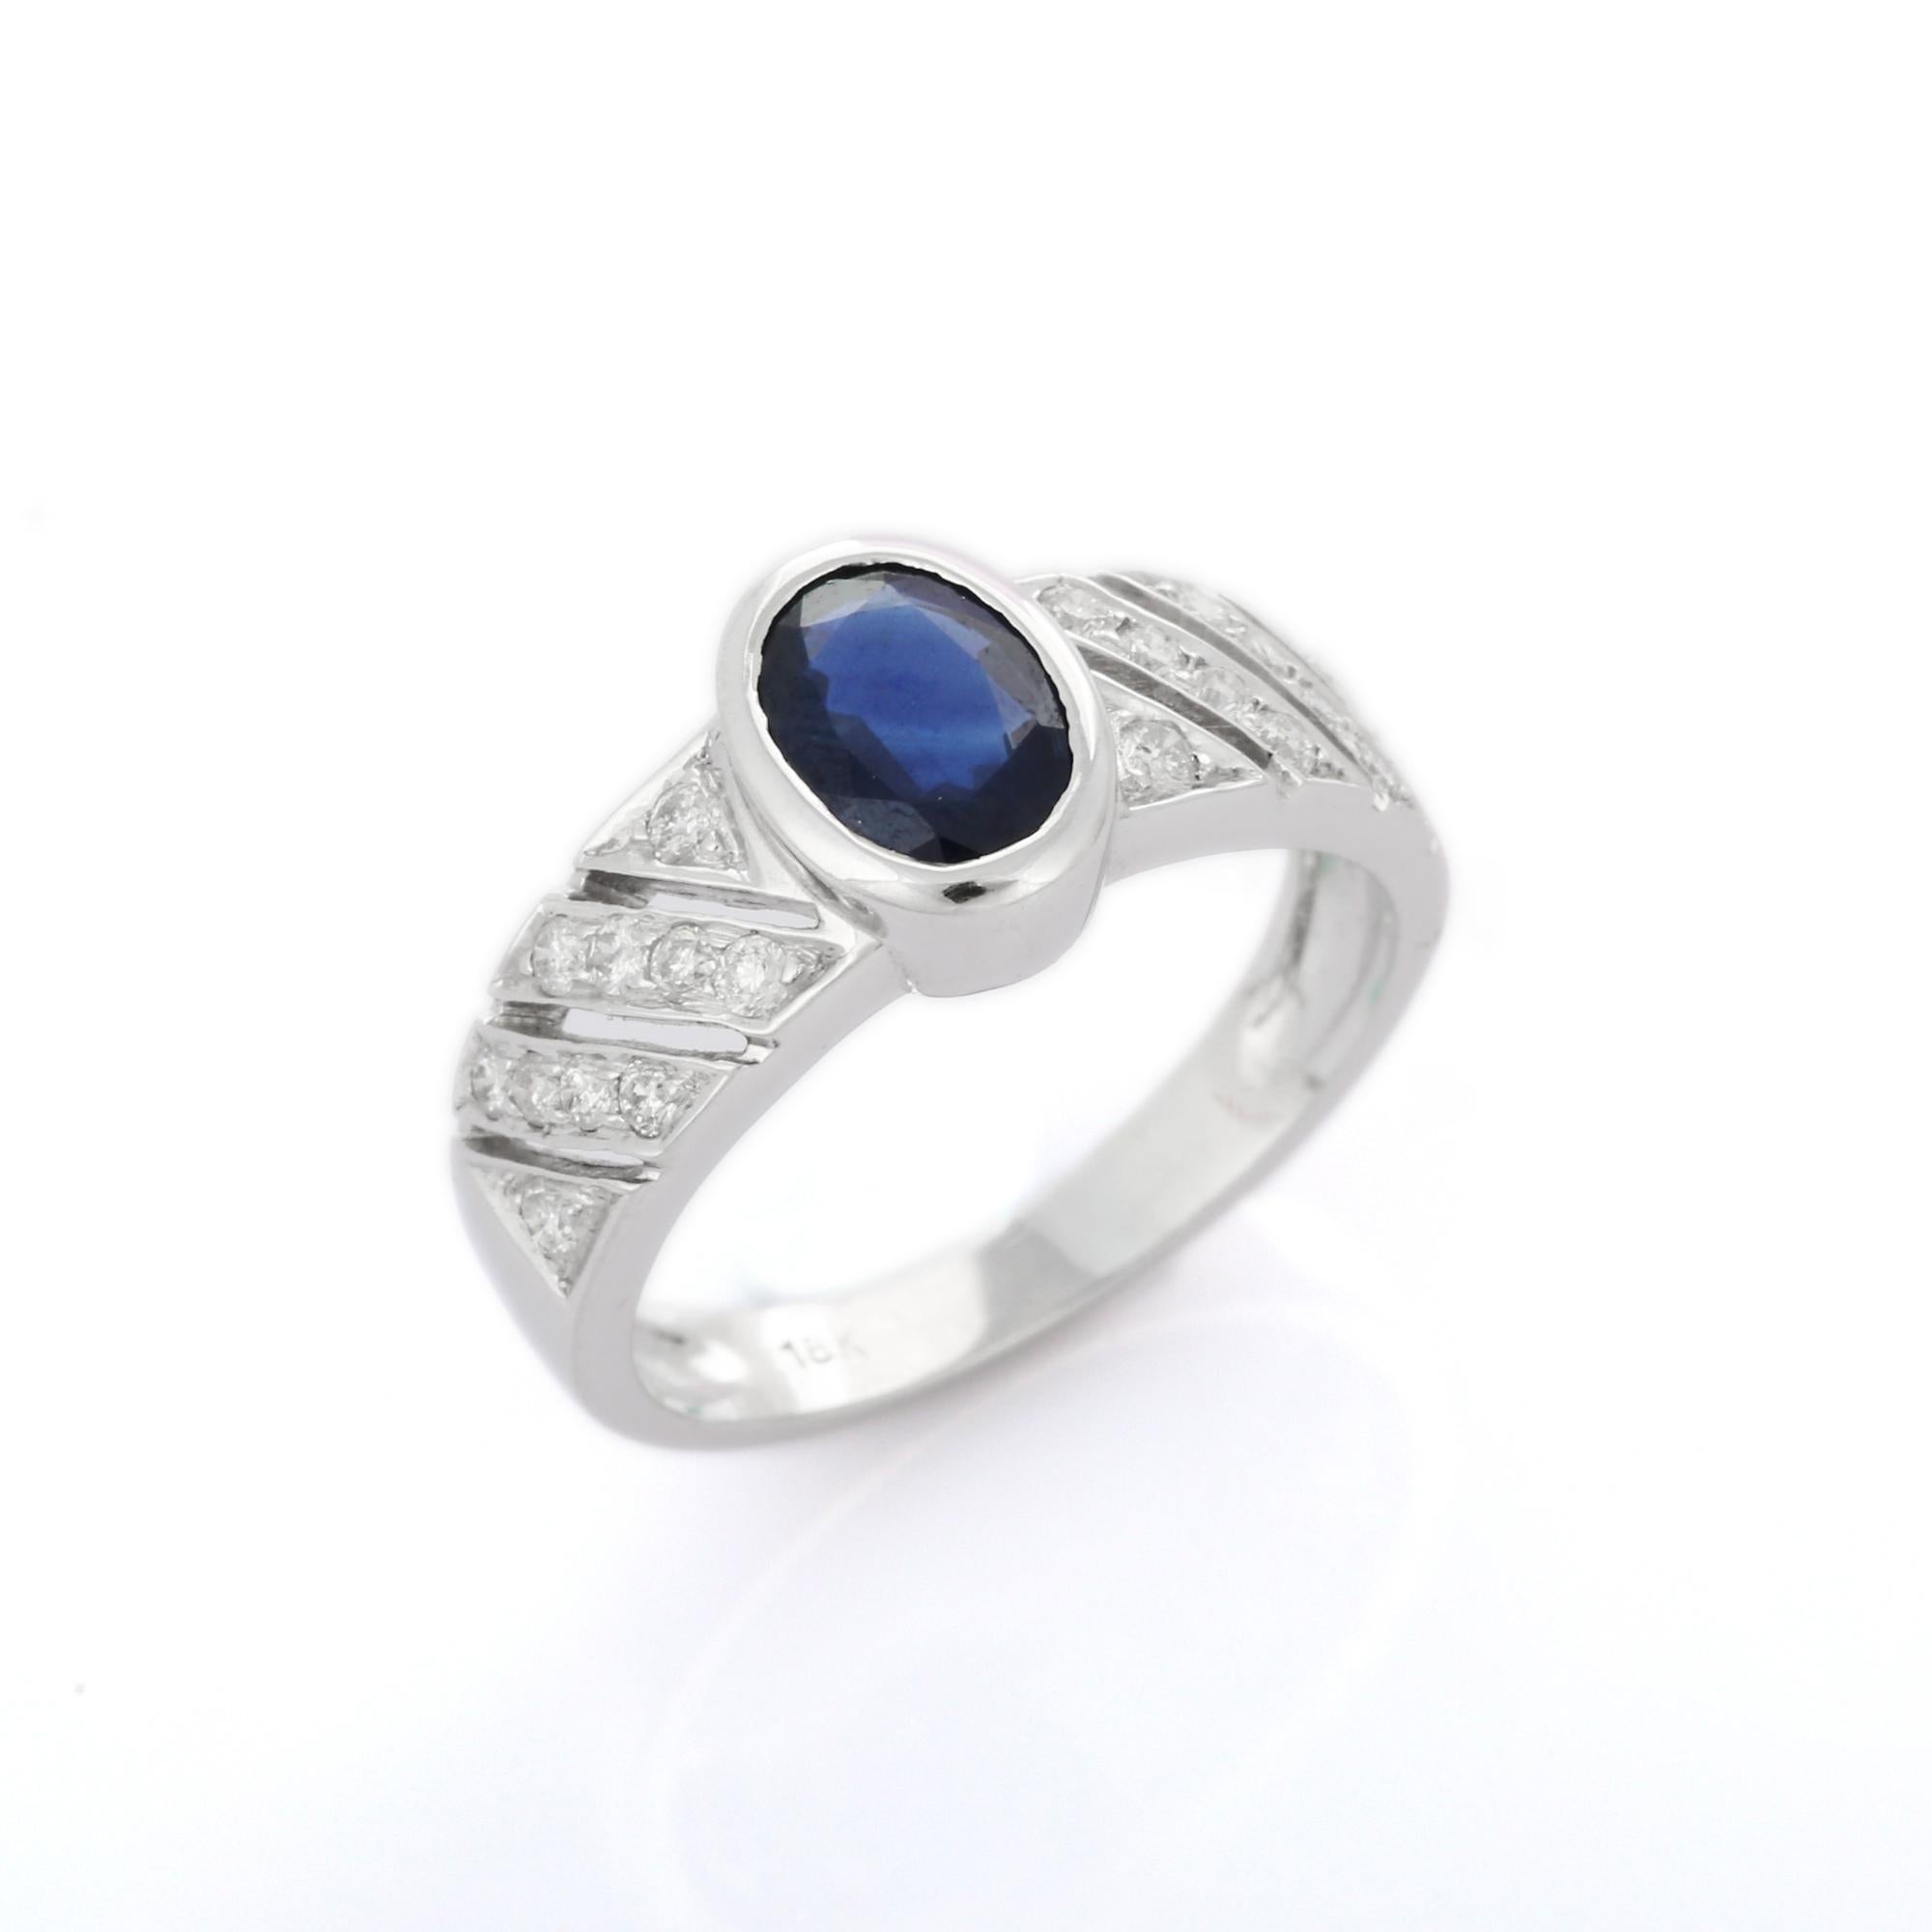 For Sale:  Exquisite Deep Blue Sapphire Diamond Engagement Ring in 18K White Gold 8